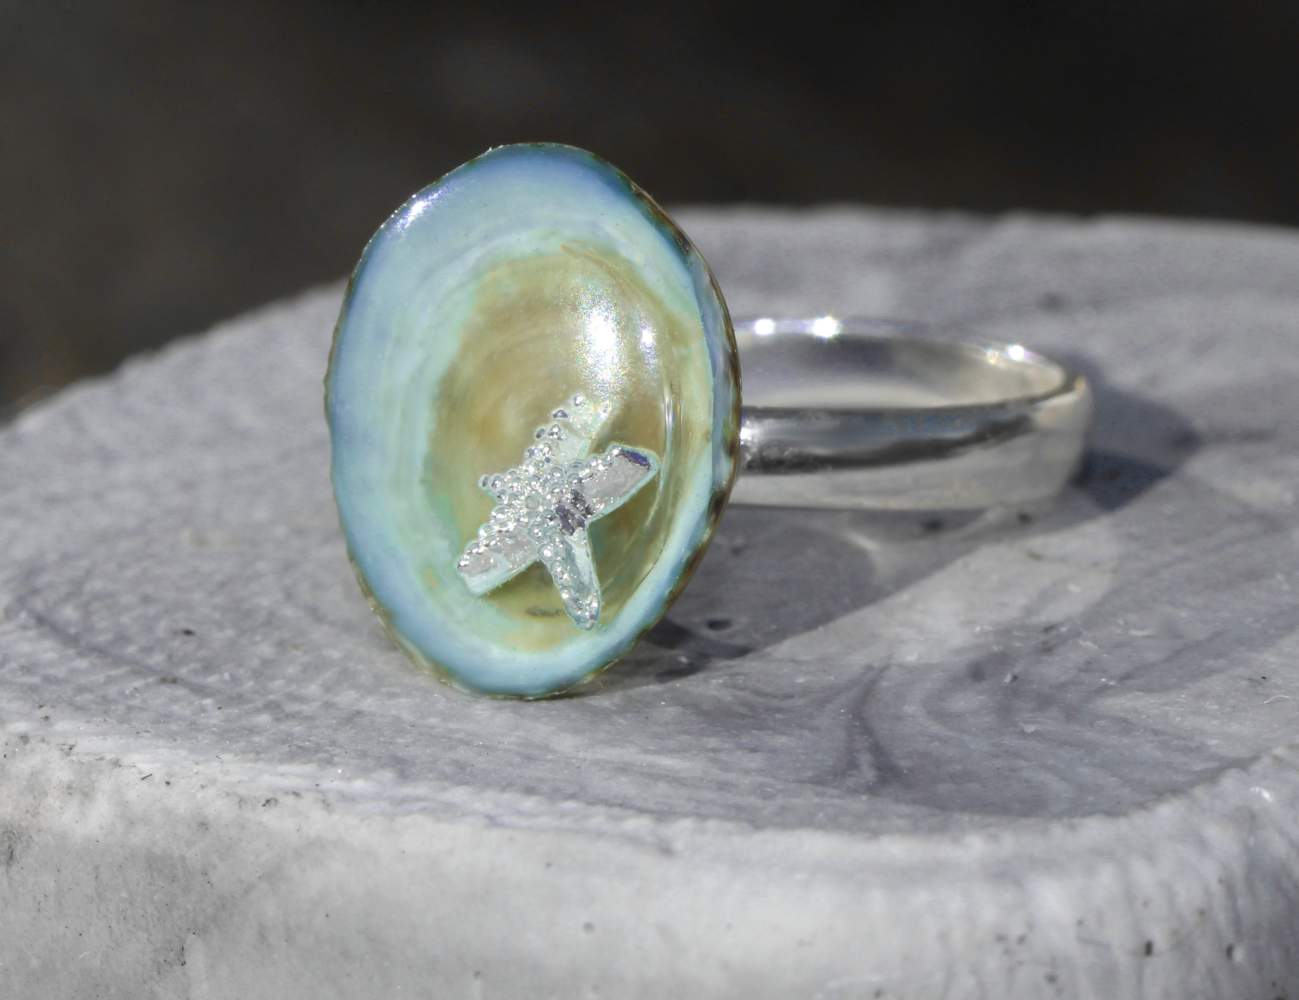 Villa Sorgenfrei 925 silver ring turquoise ring starfish jewelry summer holiday mermaid ring sea shell seashell handmade jewellery birthday gift mothers day nautical jewelry maritime jewelry gifts for her